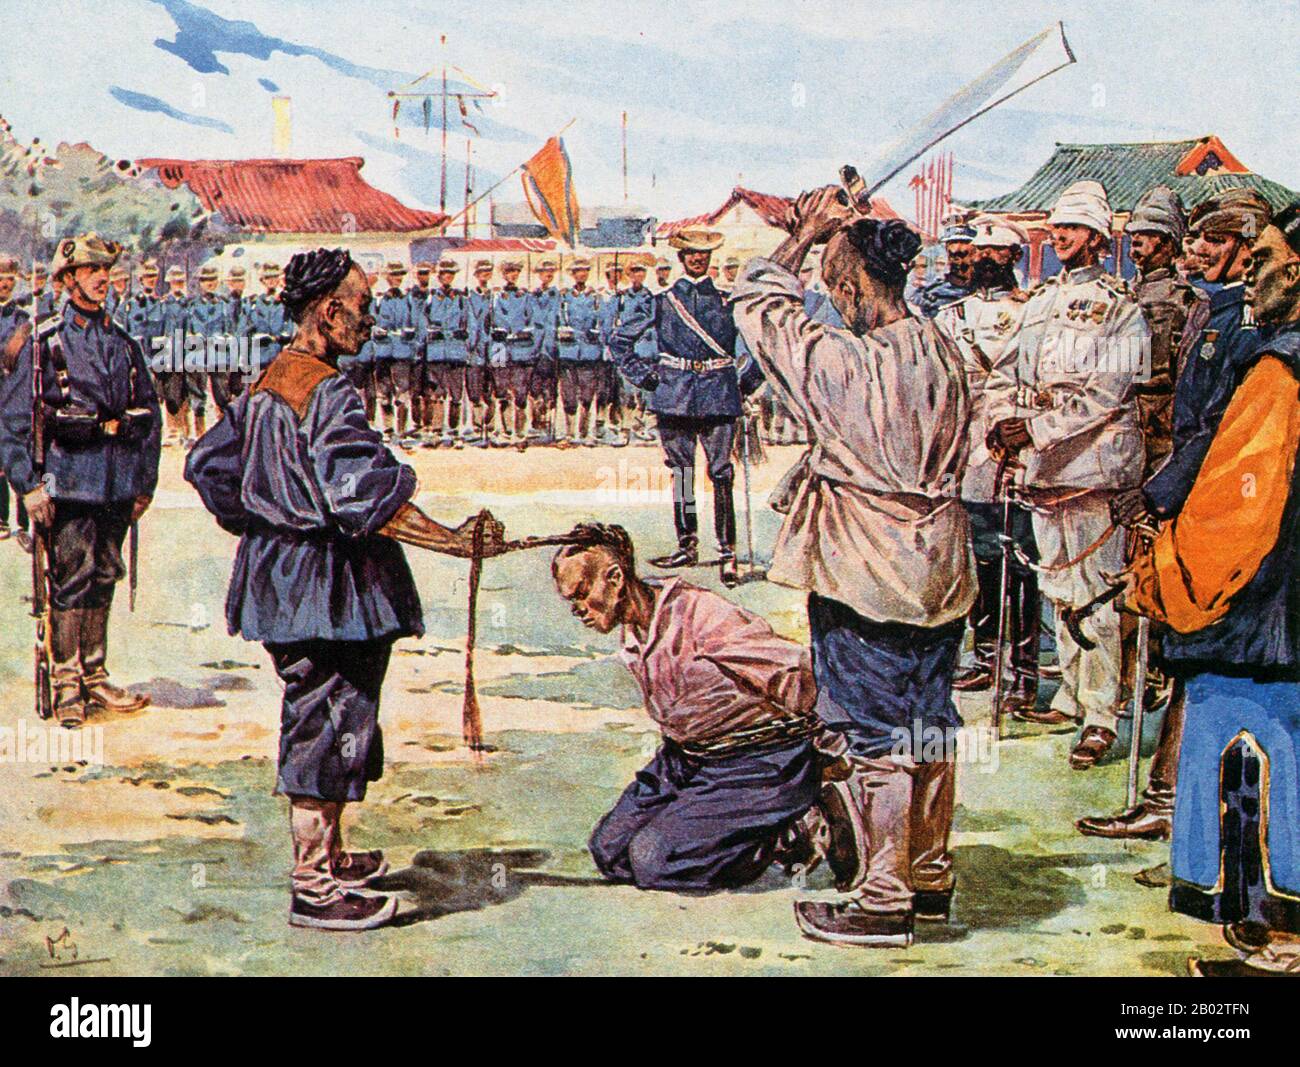 The Boxer Rebellion, also known as Boxer Uprising or Yihetuan Movement, was a proto-nationalist movement by the Righteous Harmony Society in China between 1898 and 1901, opposing foreign imperialism and Christianity.  The uprising took place in response to foreign spheres of influence in China, with grievances ranging from opium traders, political invasion, economic manipulation, to missionary evangelism. In China, popular sentiment remained resistant to foreign influences, and anger rose over the 'unequal treaties', which the weak Qing state could not resist.  Concerns grew that missionaries Stock Photo